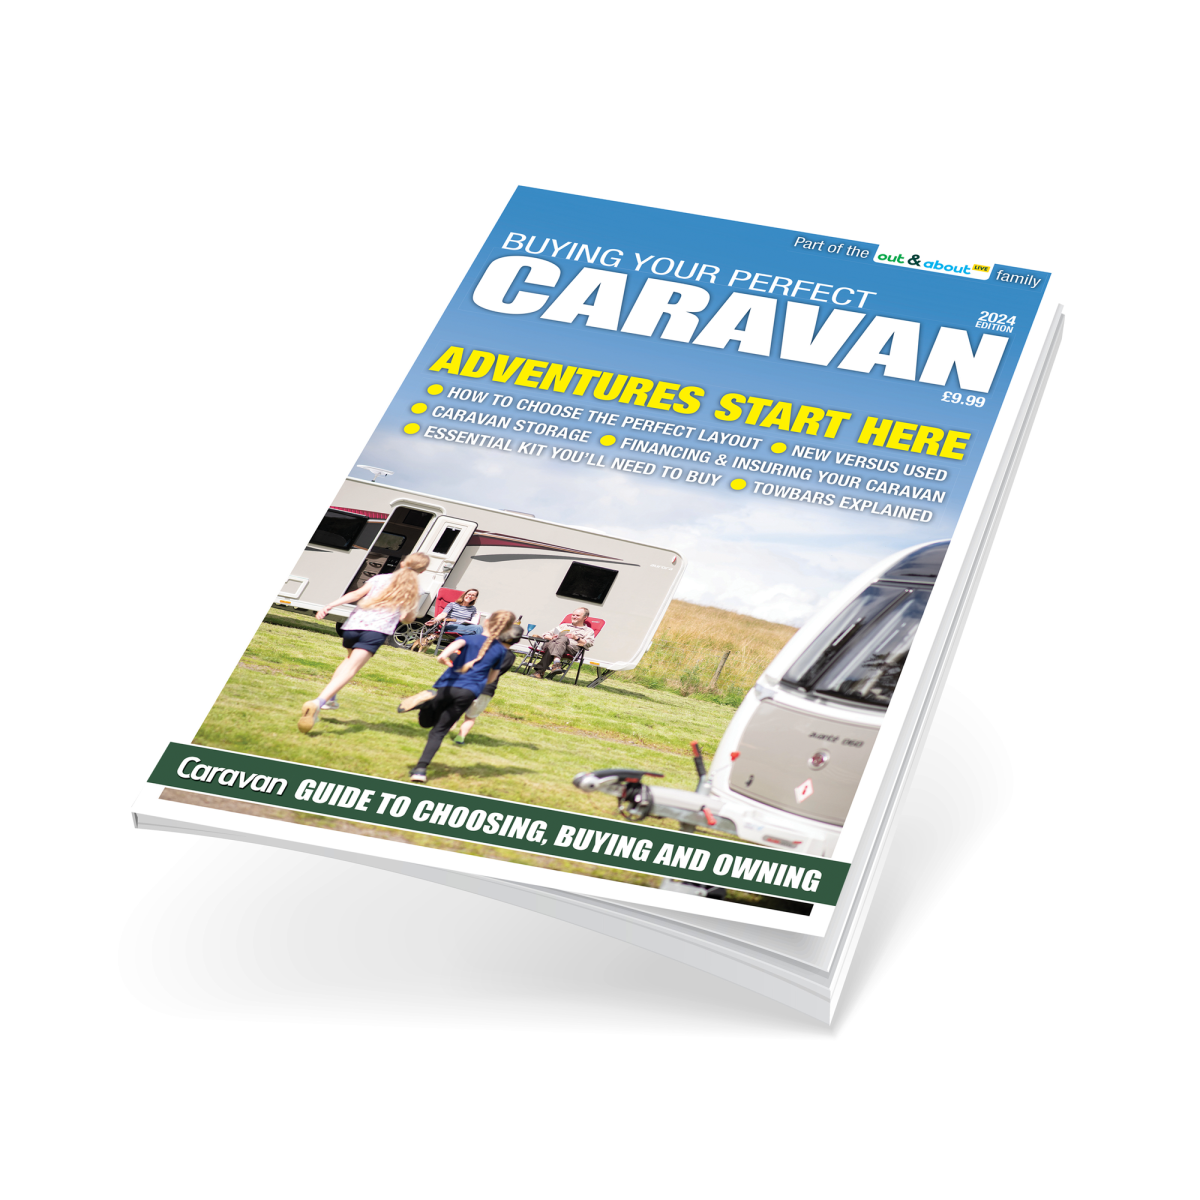 Buying Your Perfect Caravan - cover